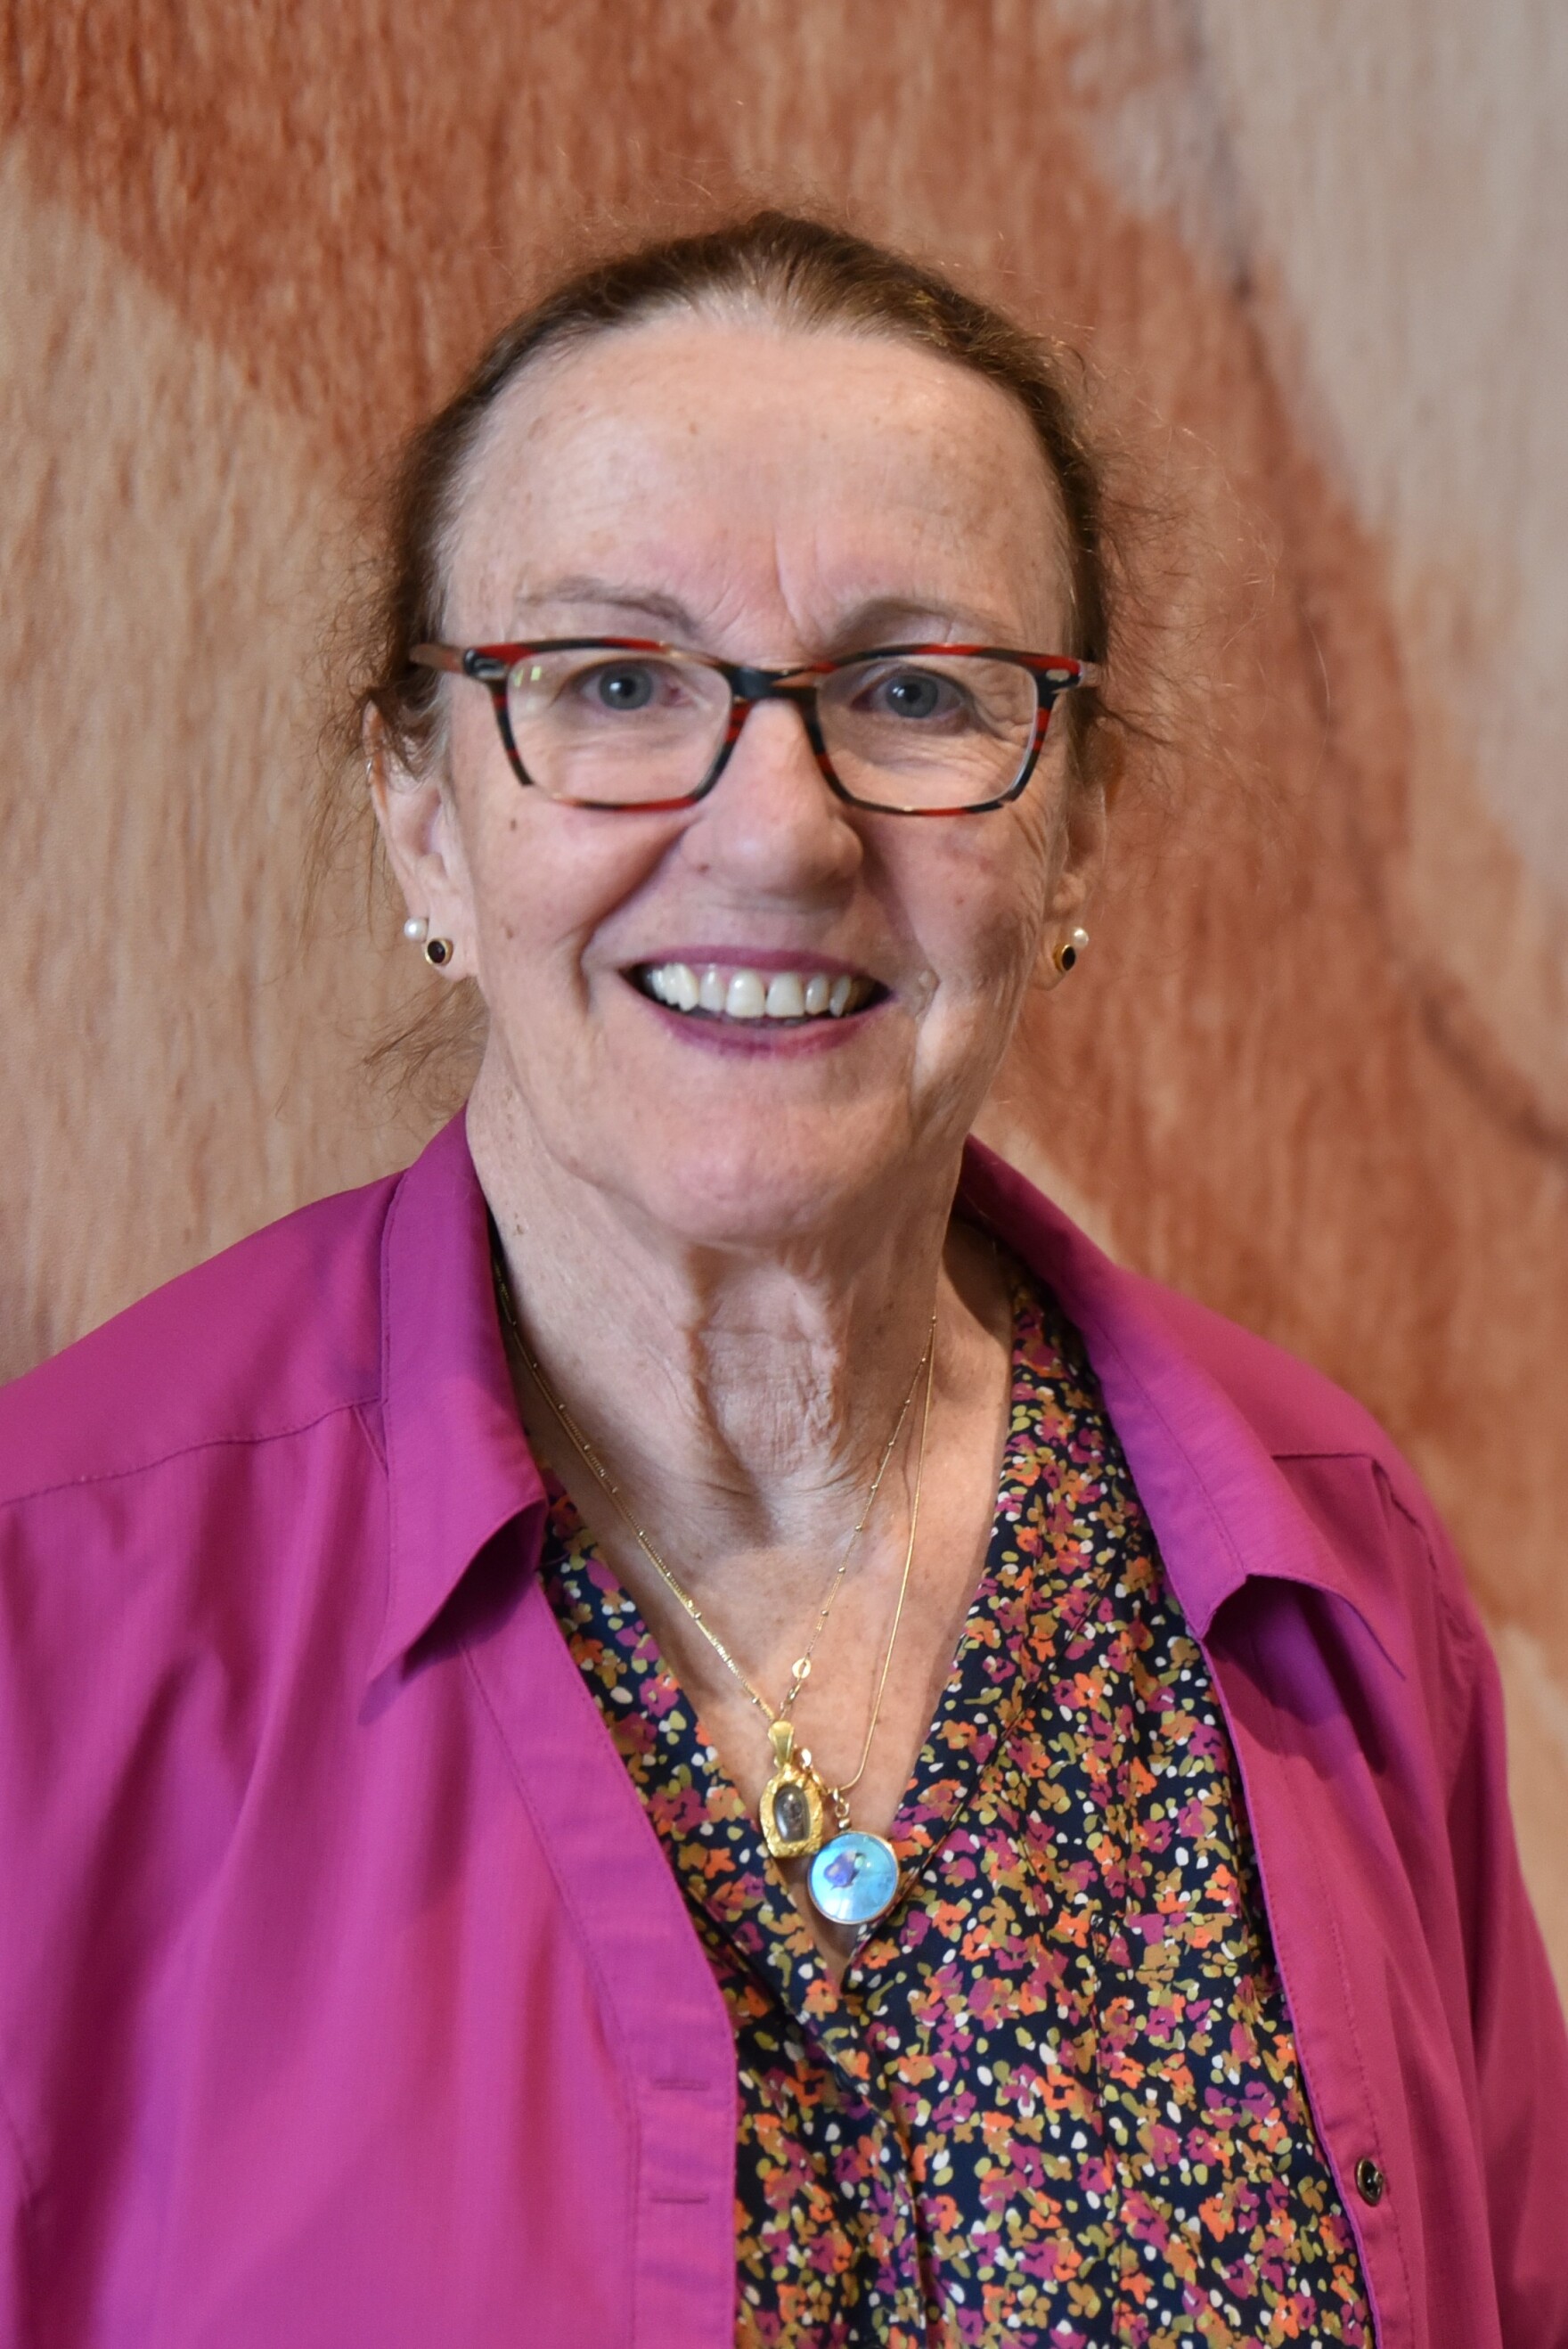 an older white woman wearing glasses, a pink shirt over a dress smiles at the camera